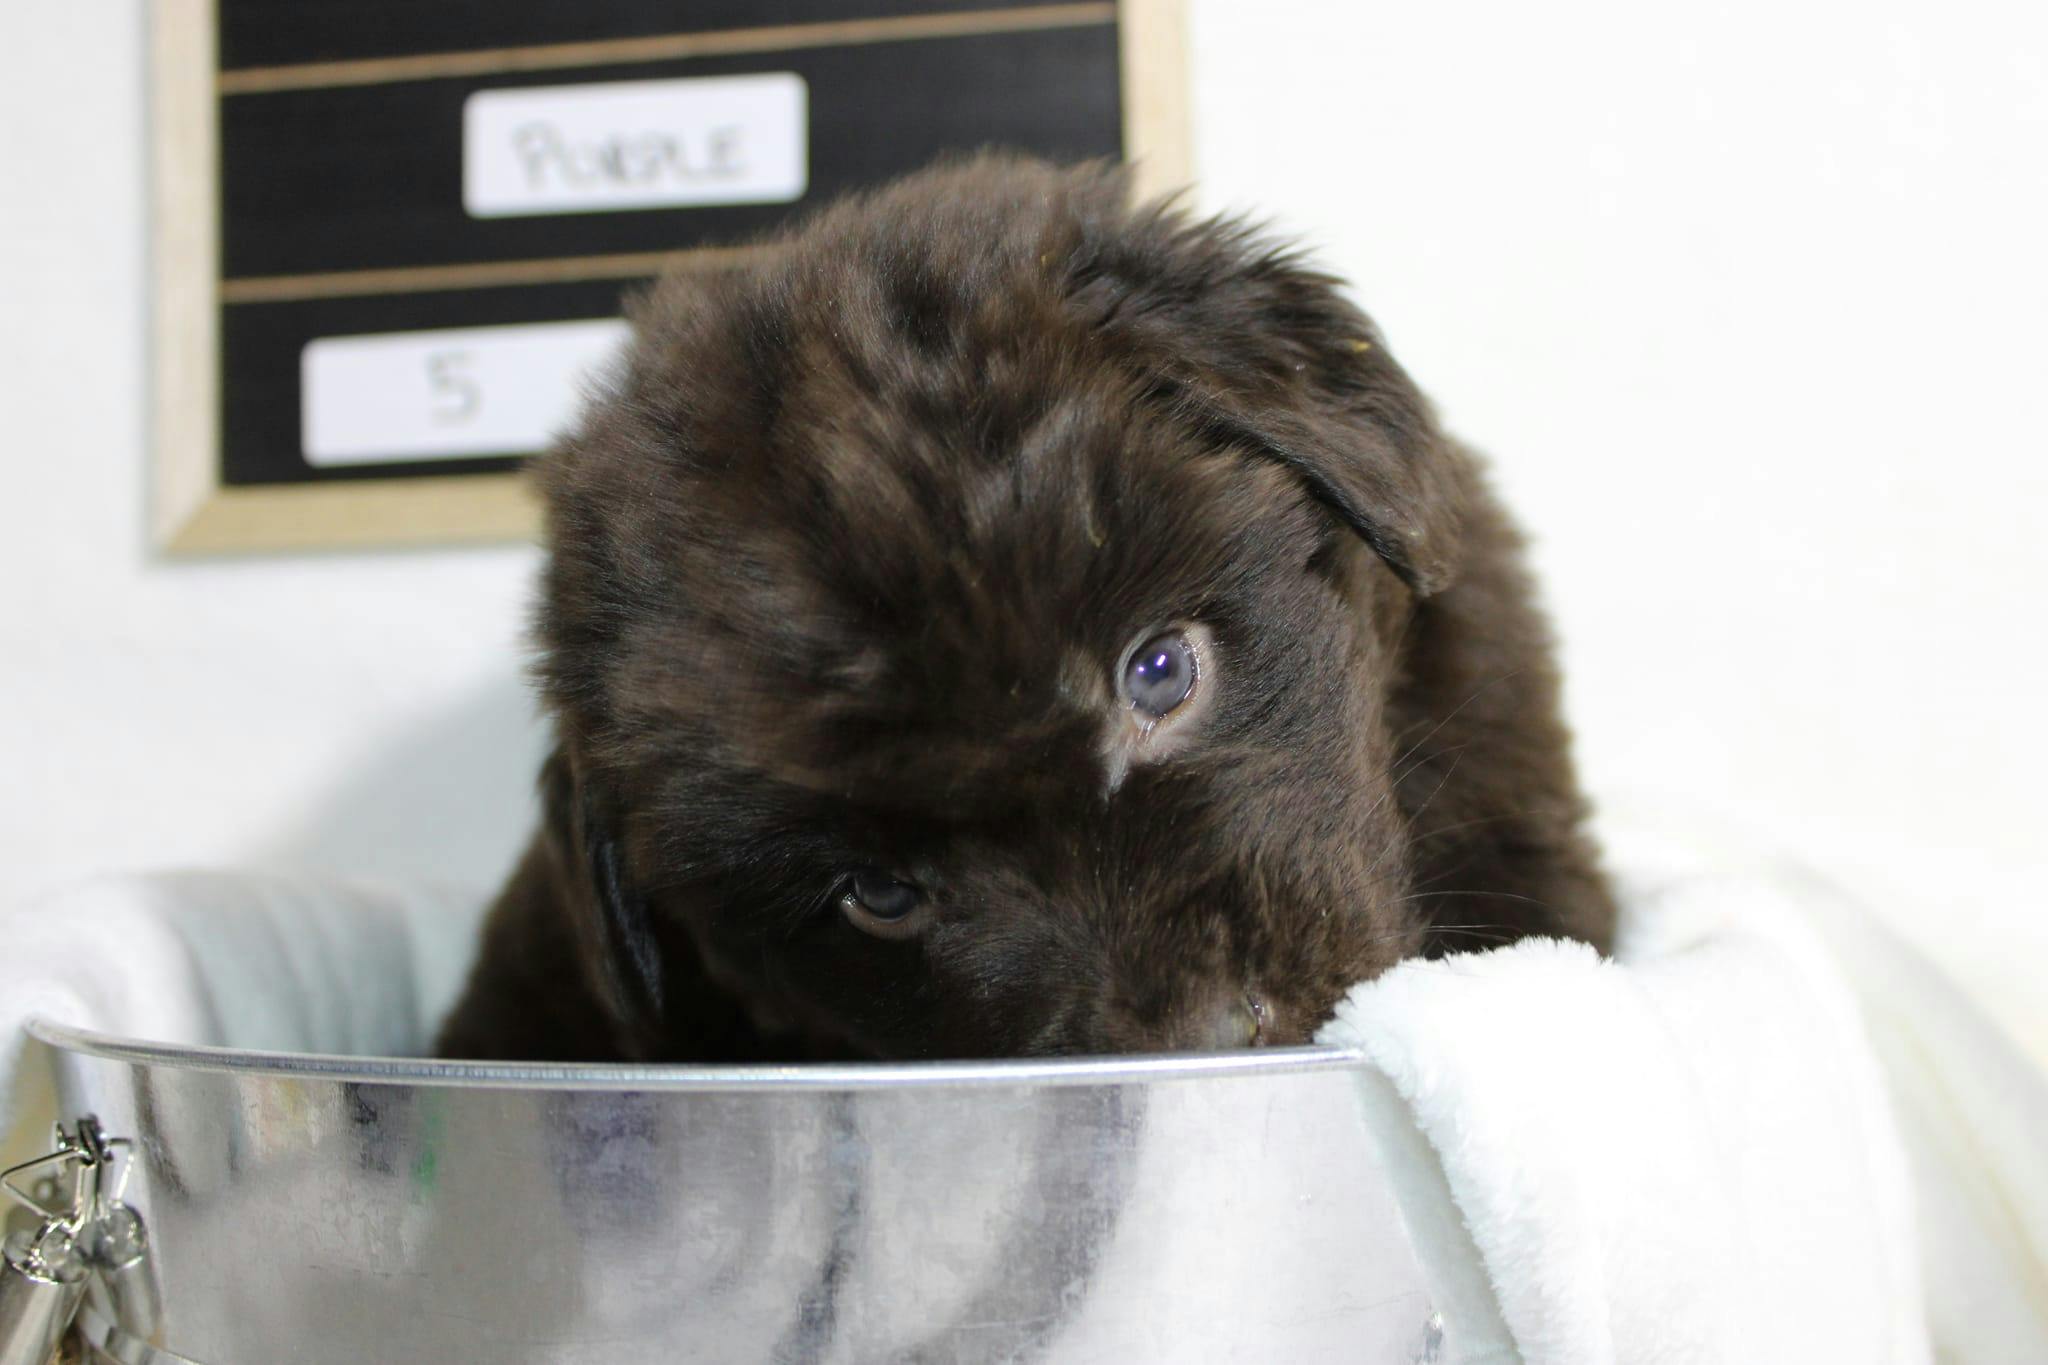 A Newfoundland puppy playing in a food bowl